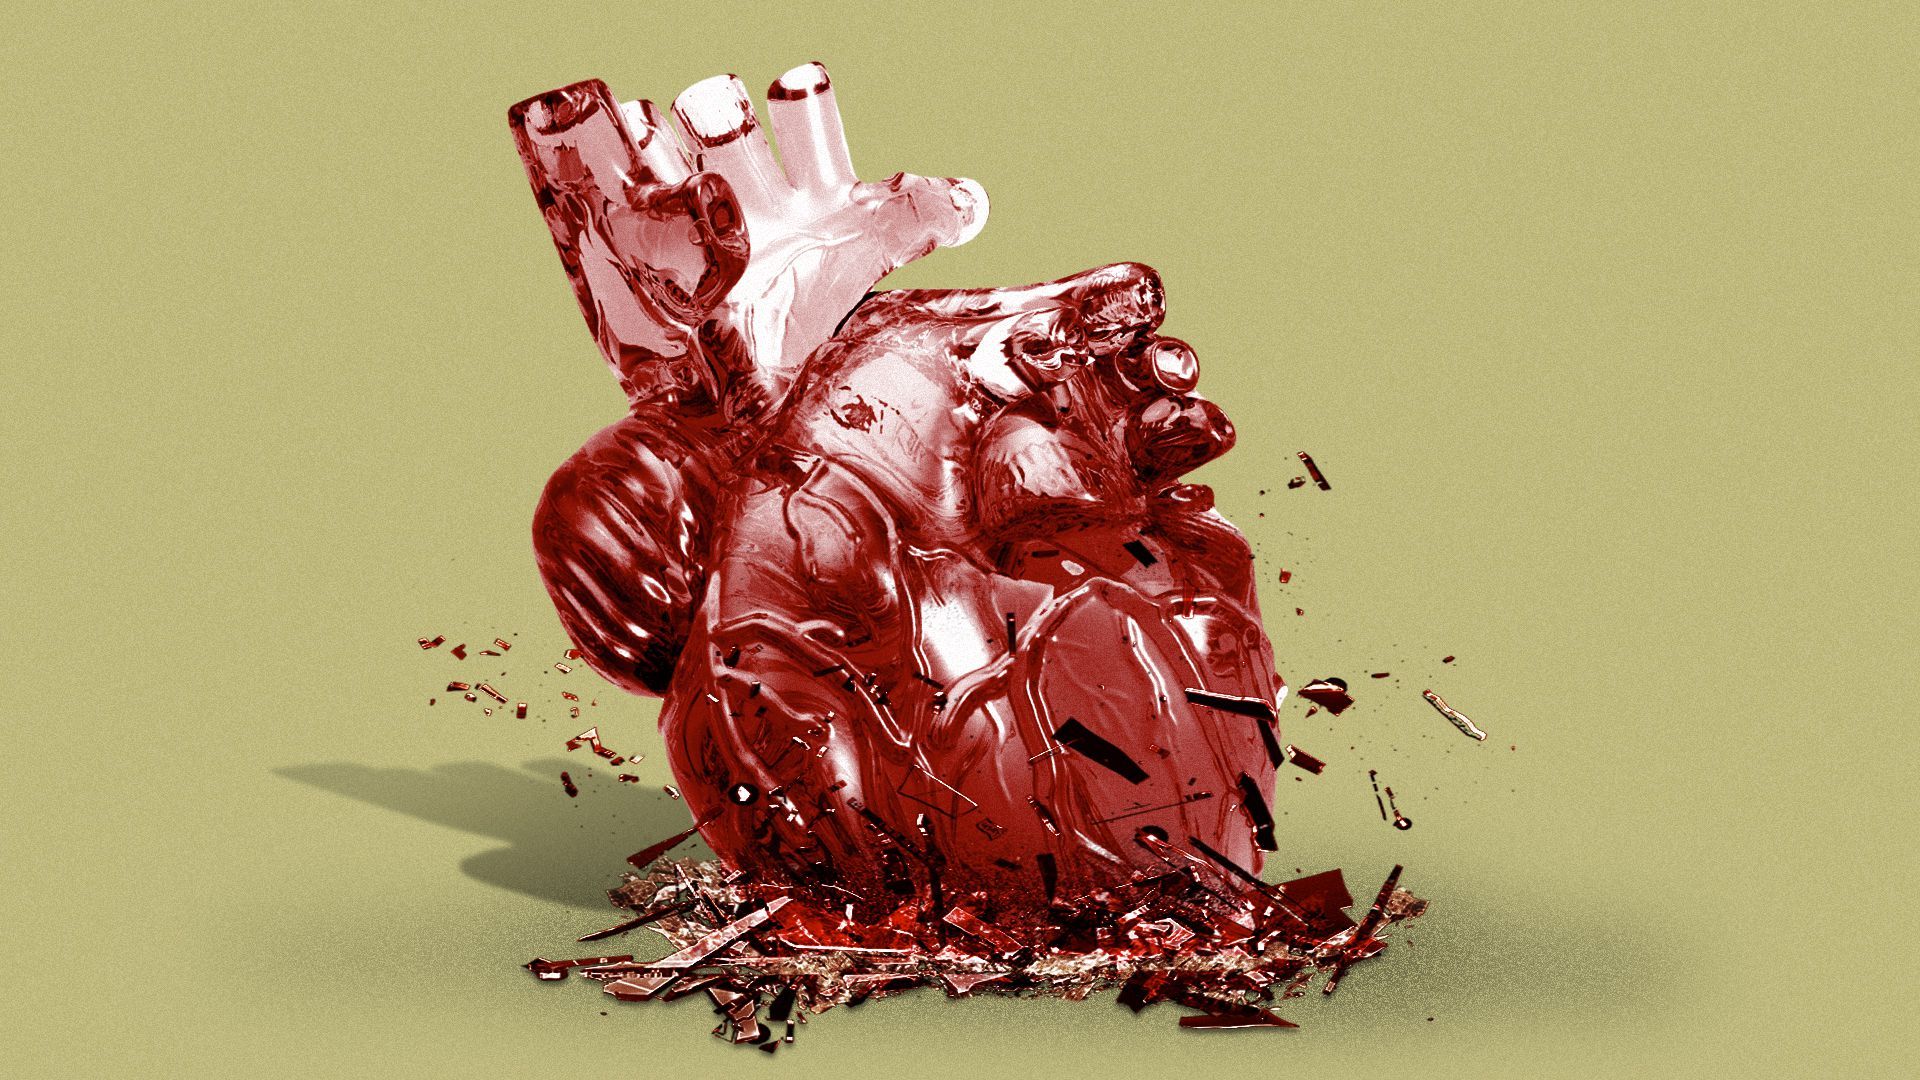 Illustration of a glass heart shattering.